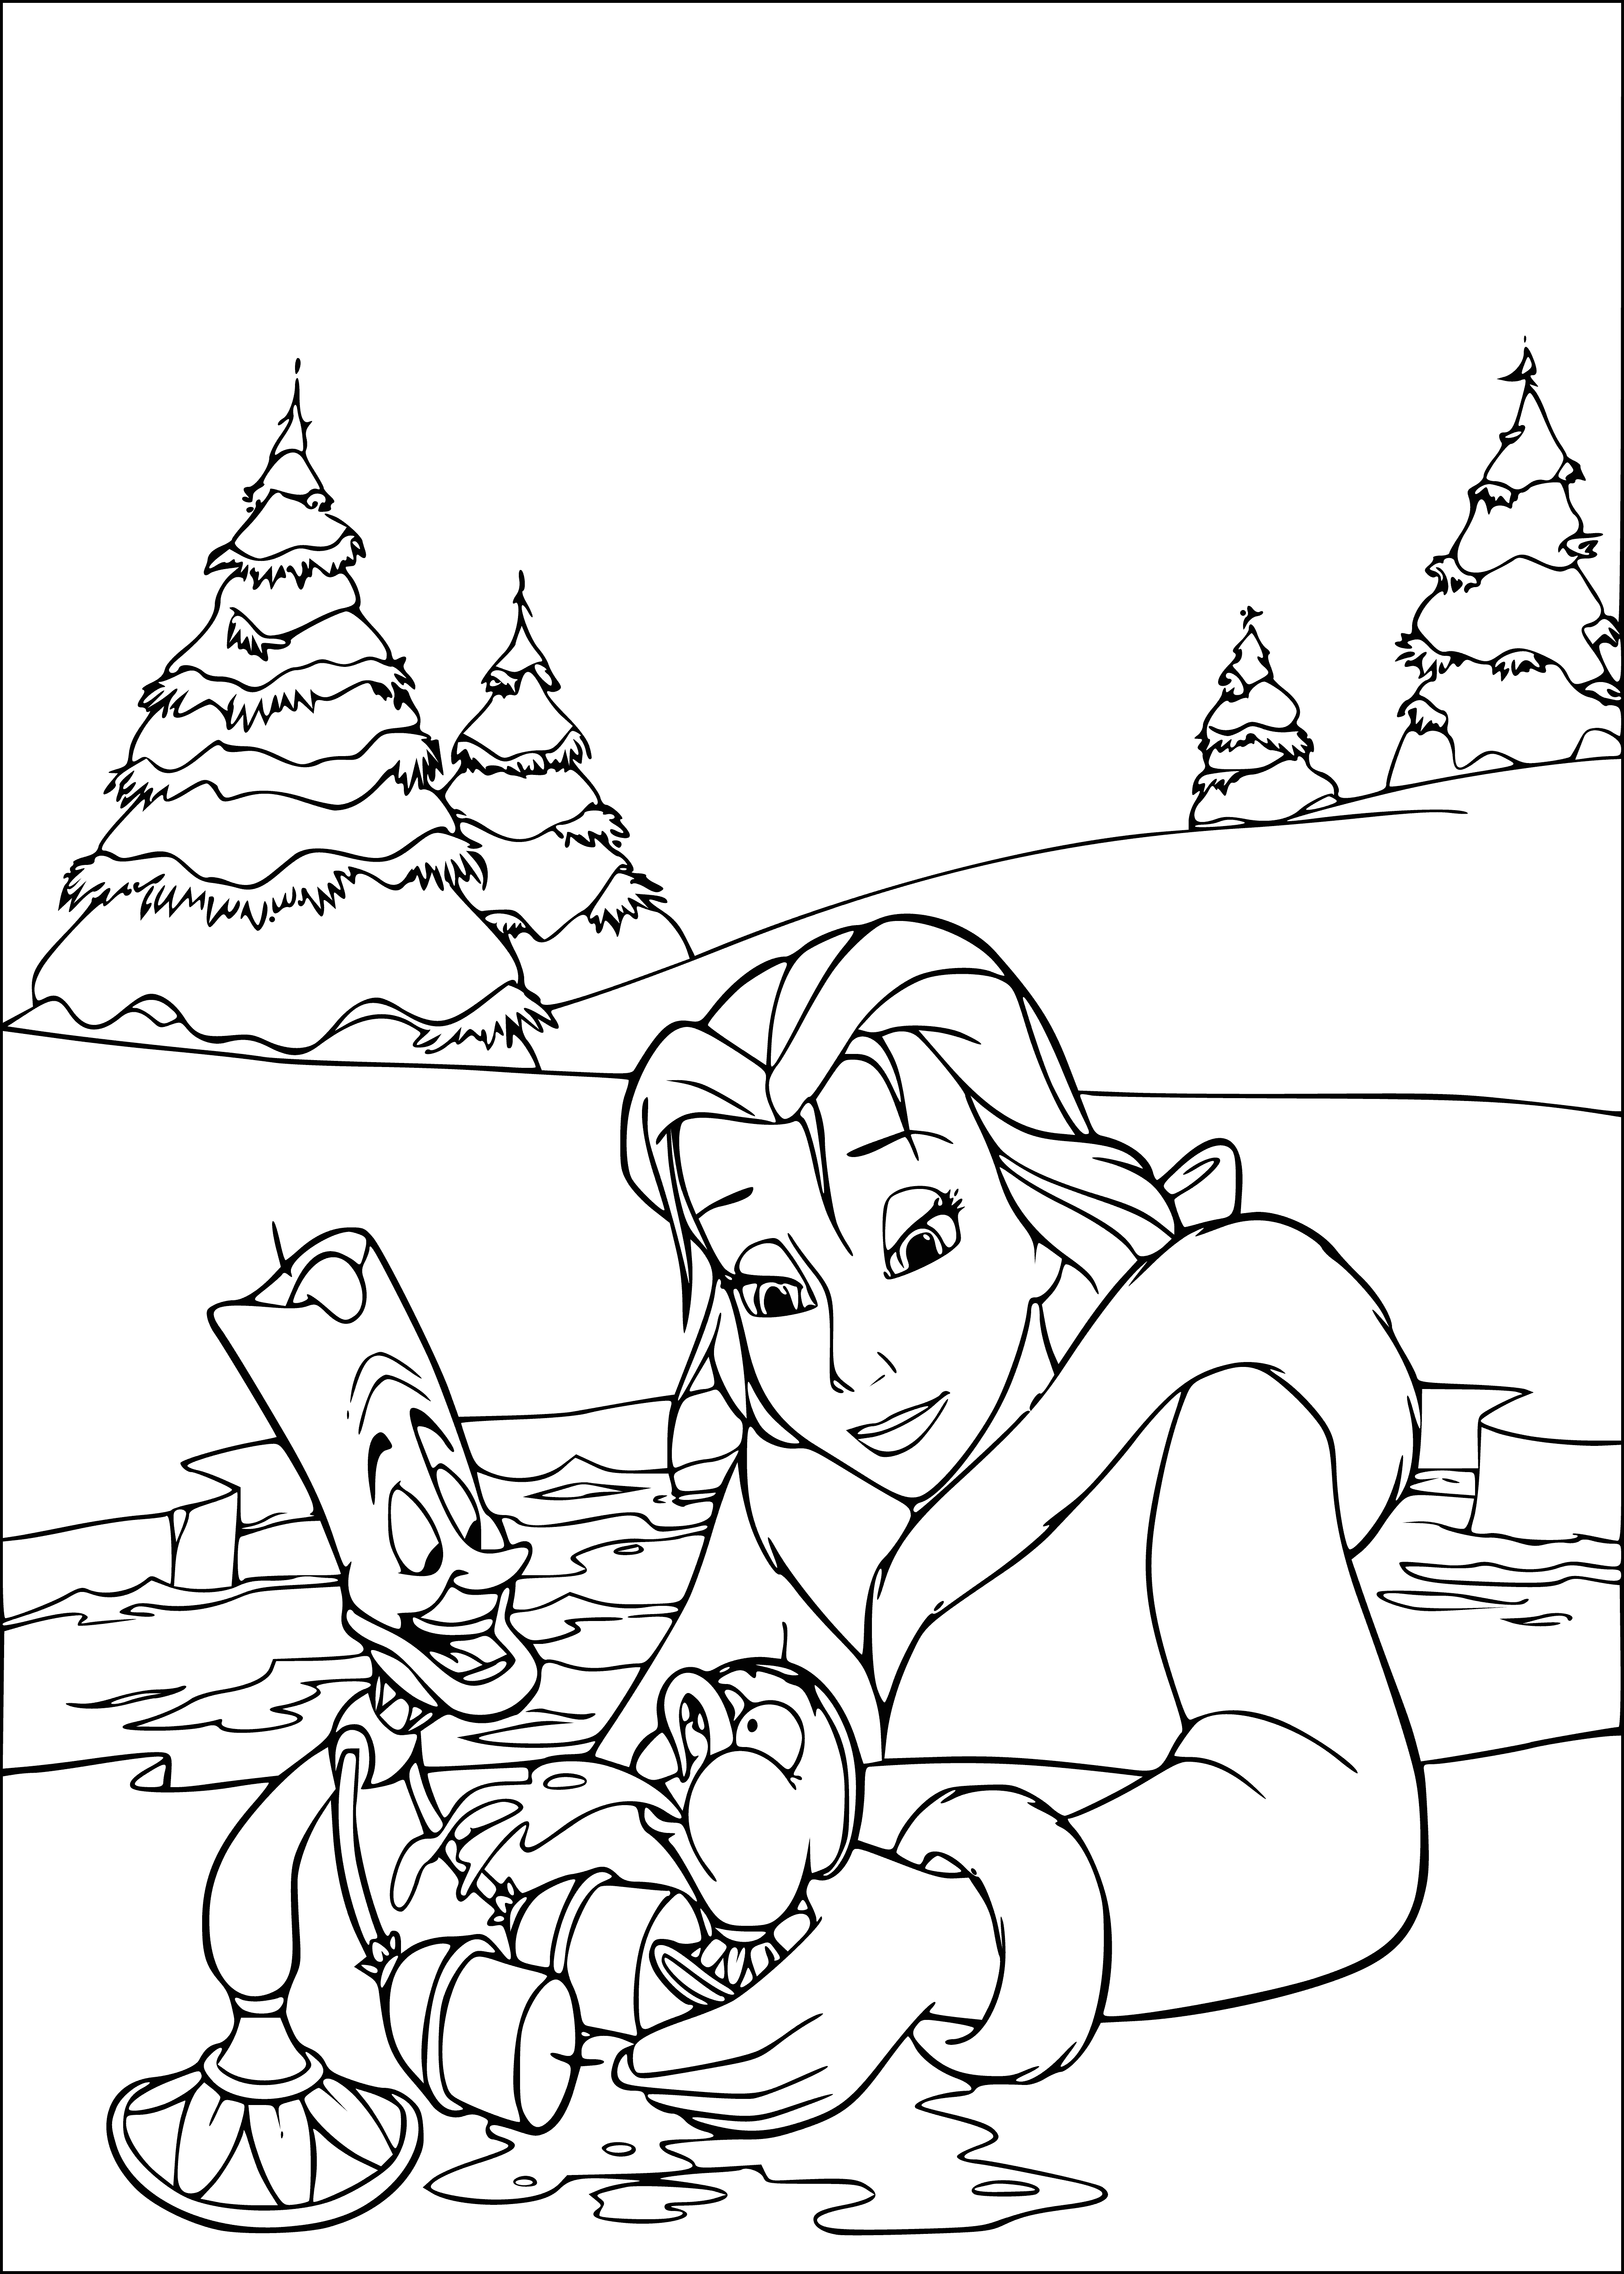 coloring page: Group stands on frozen lake. Hole has metal fence, 2 ice cubes. Man holds rope to tree; woman holds crying baby on other cube.